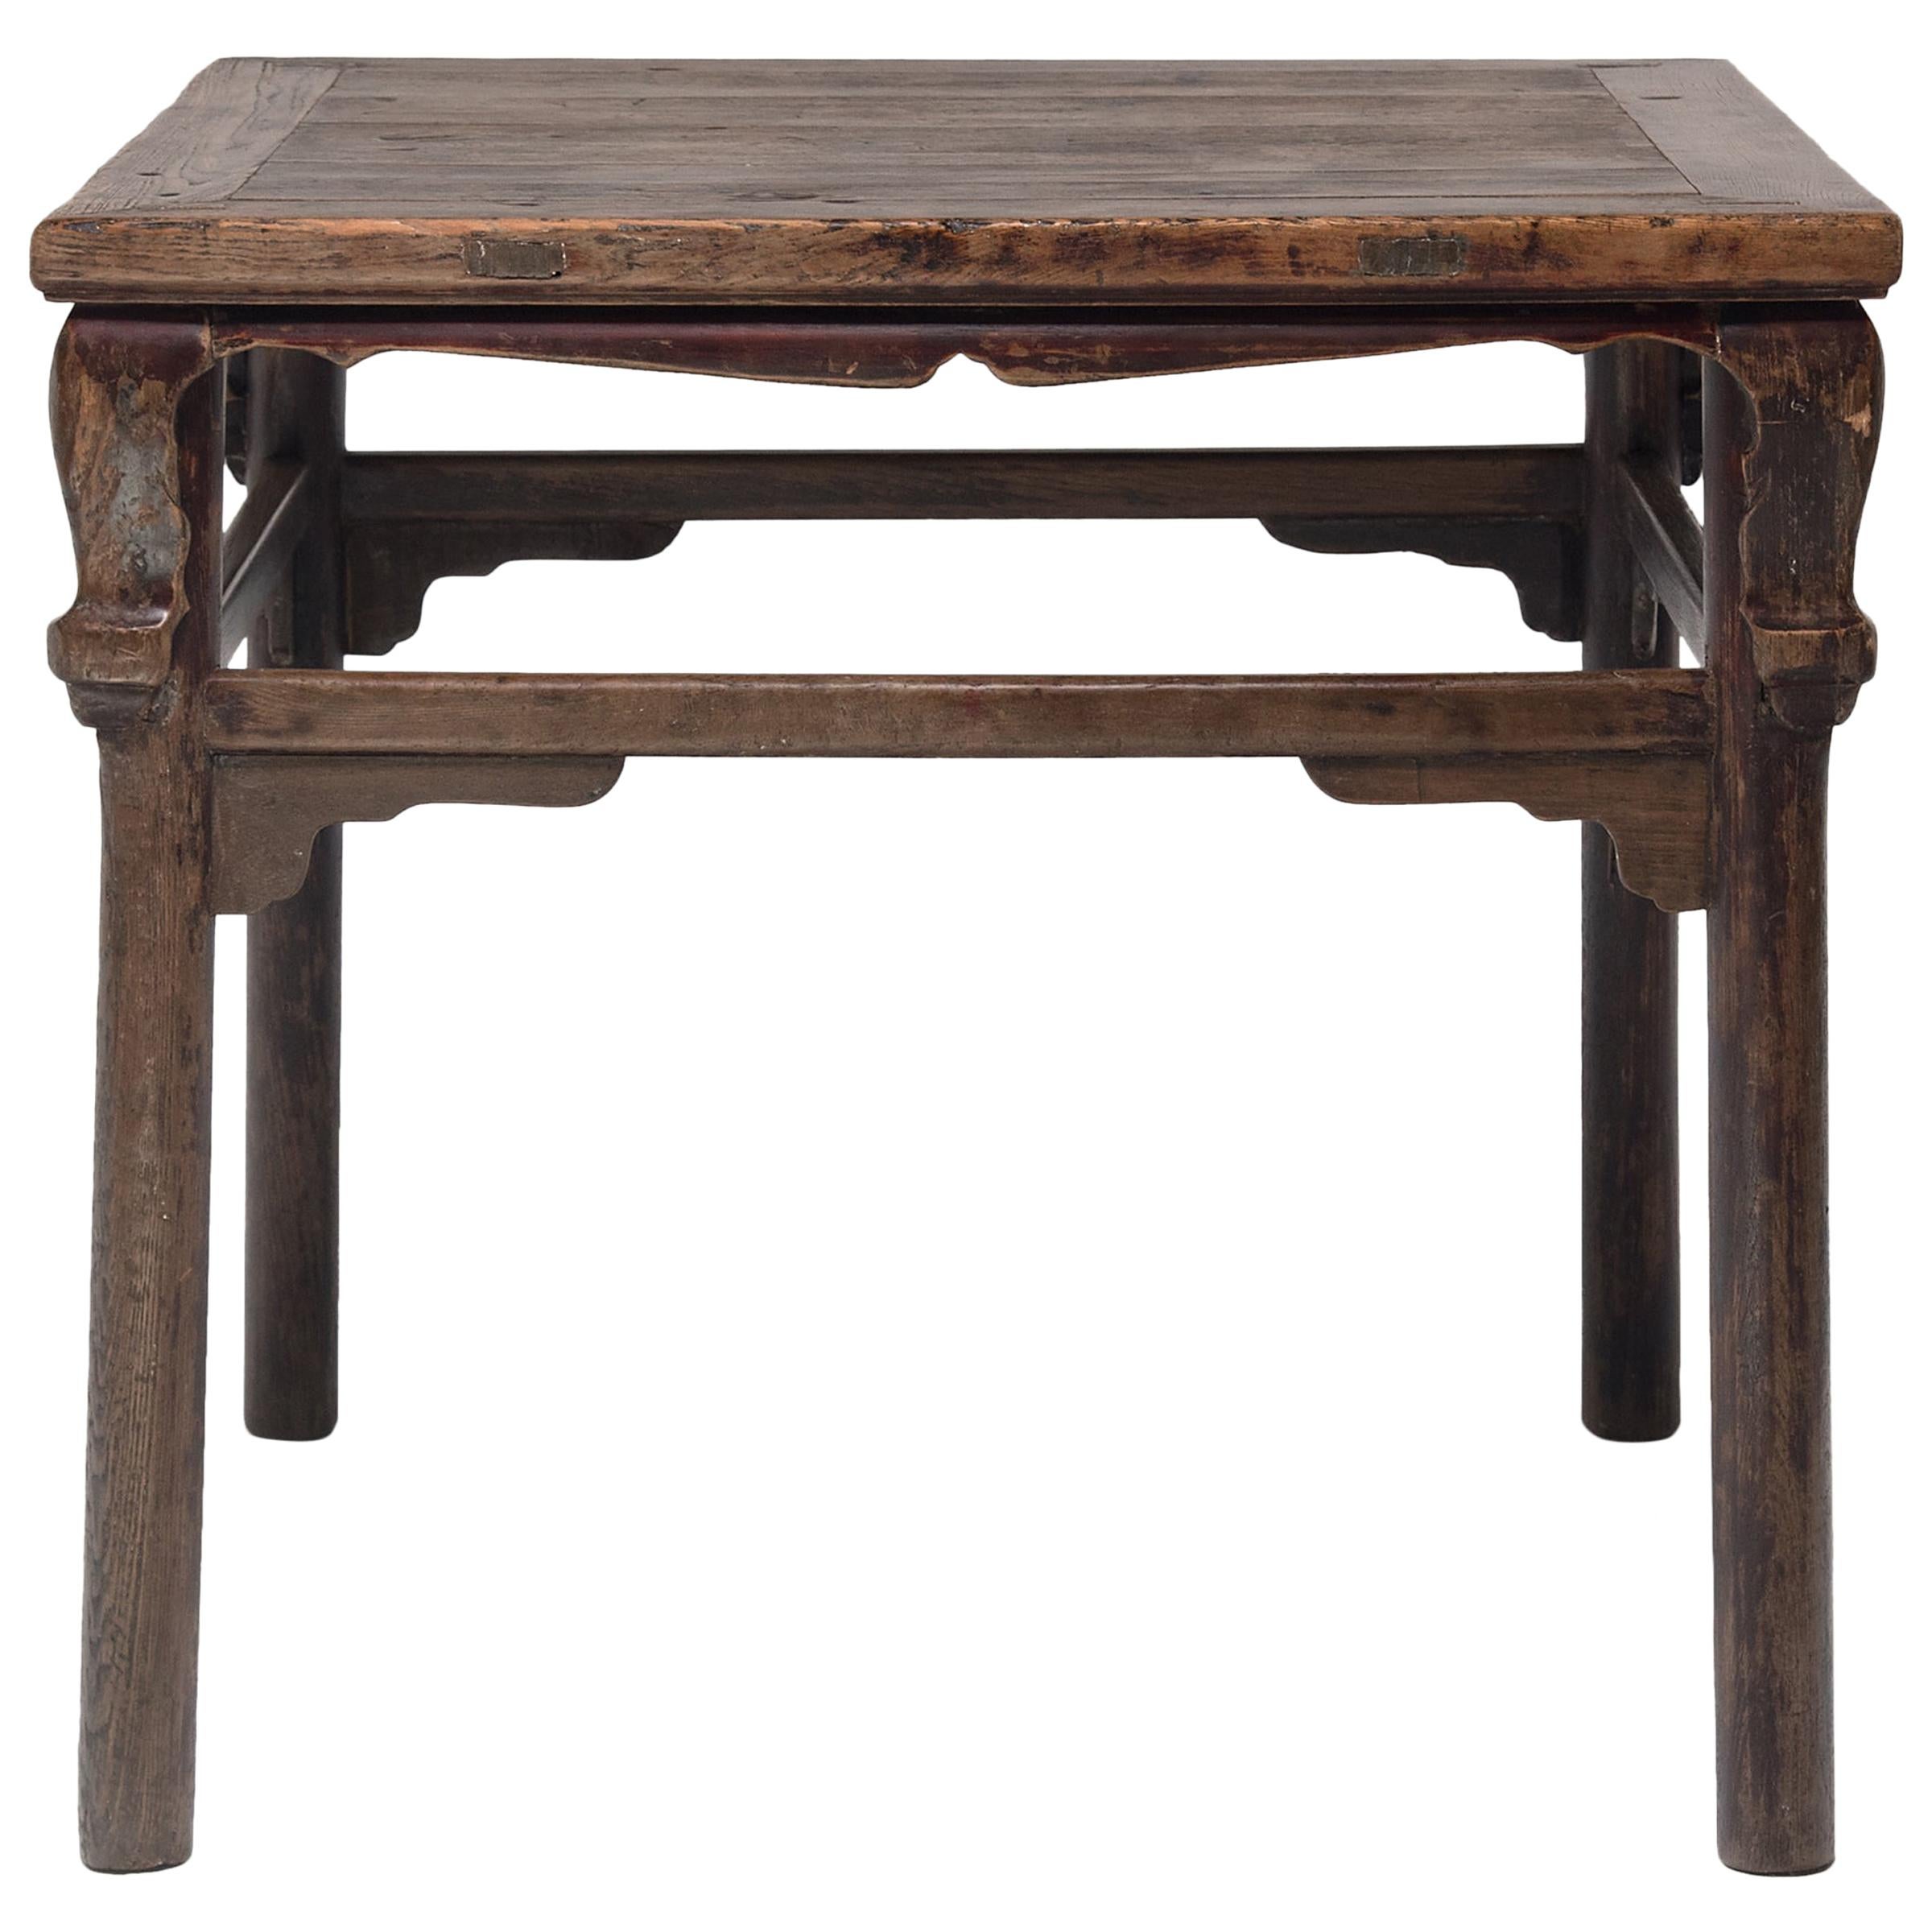 Chinese Square Display Table with Scroll Corners, circa 1850 For Sale